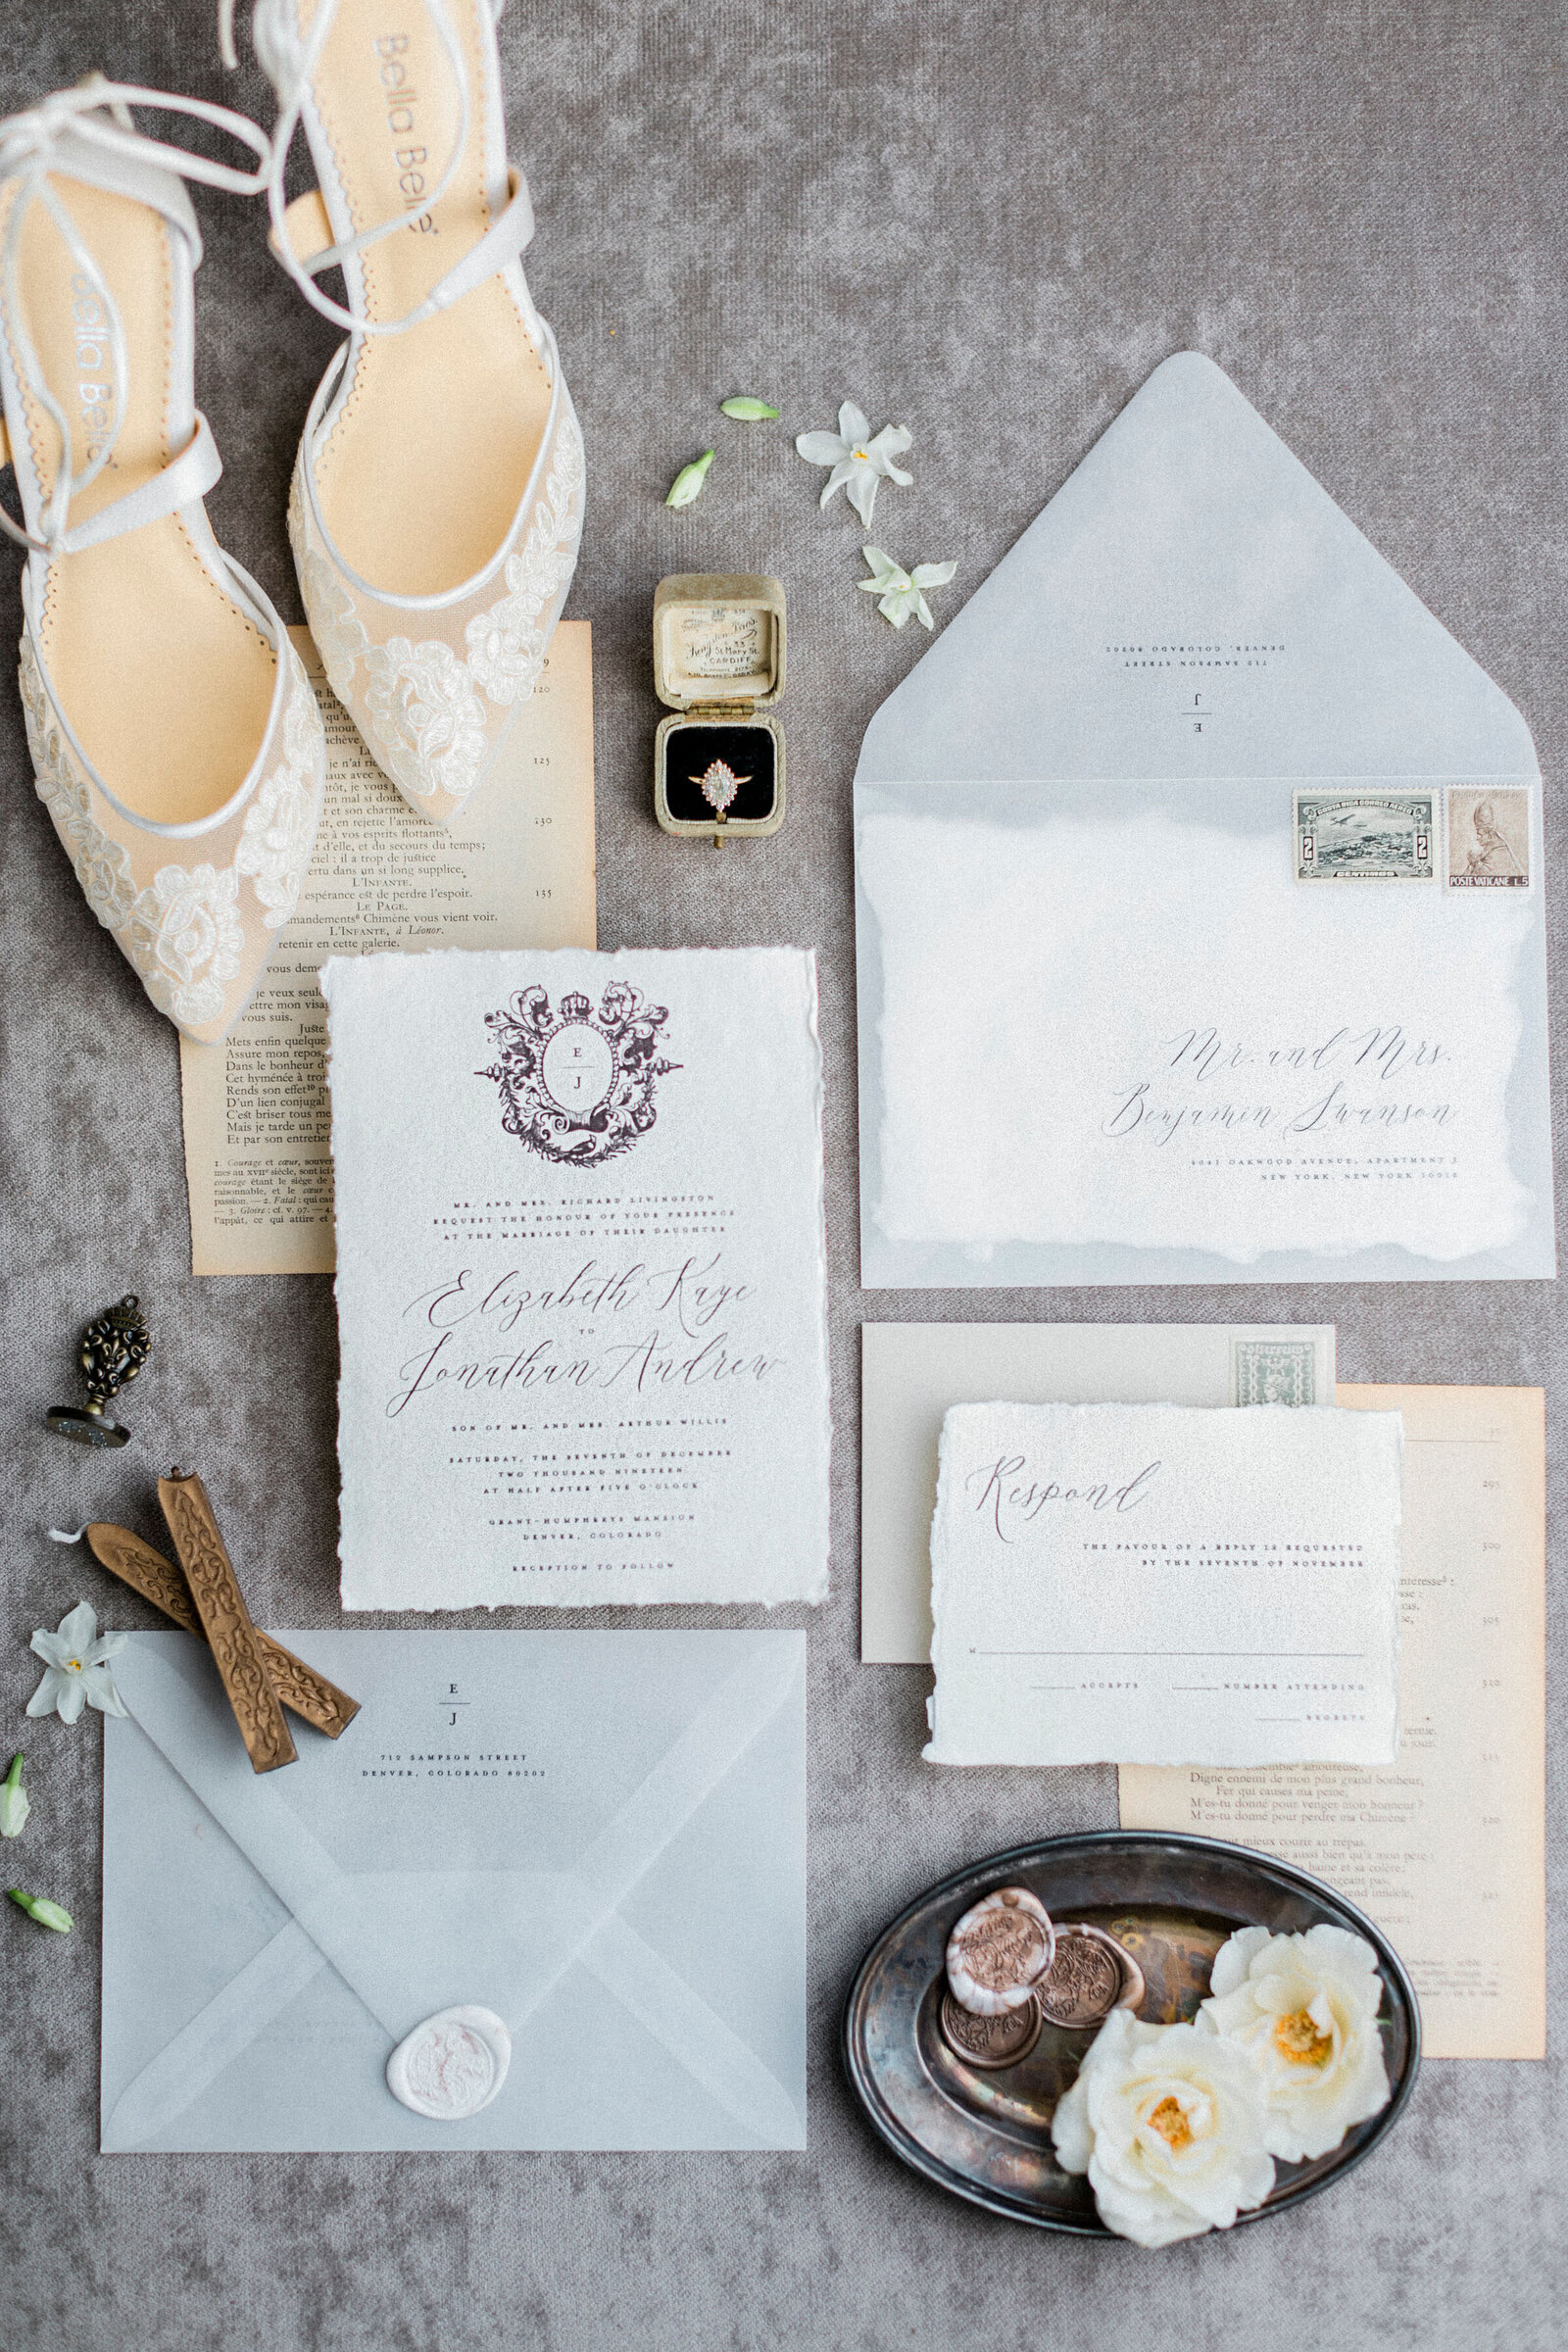 Wedding Invitations with Flowers